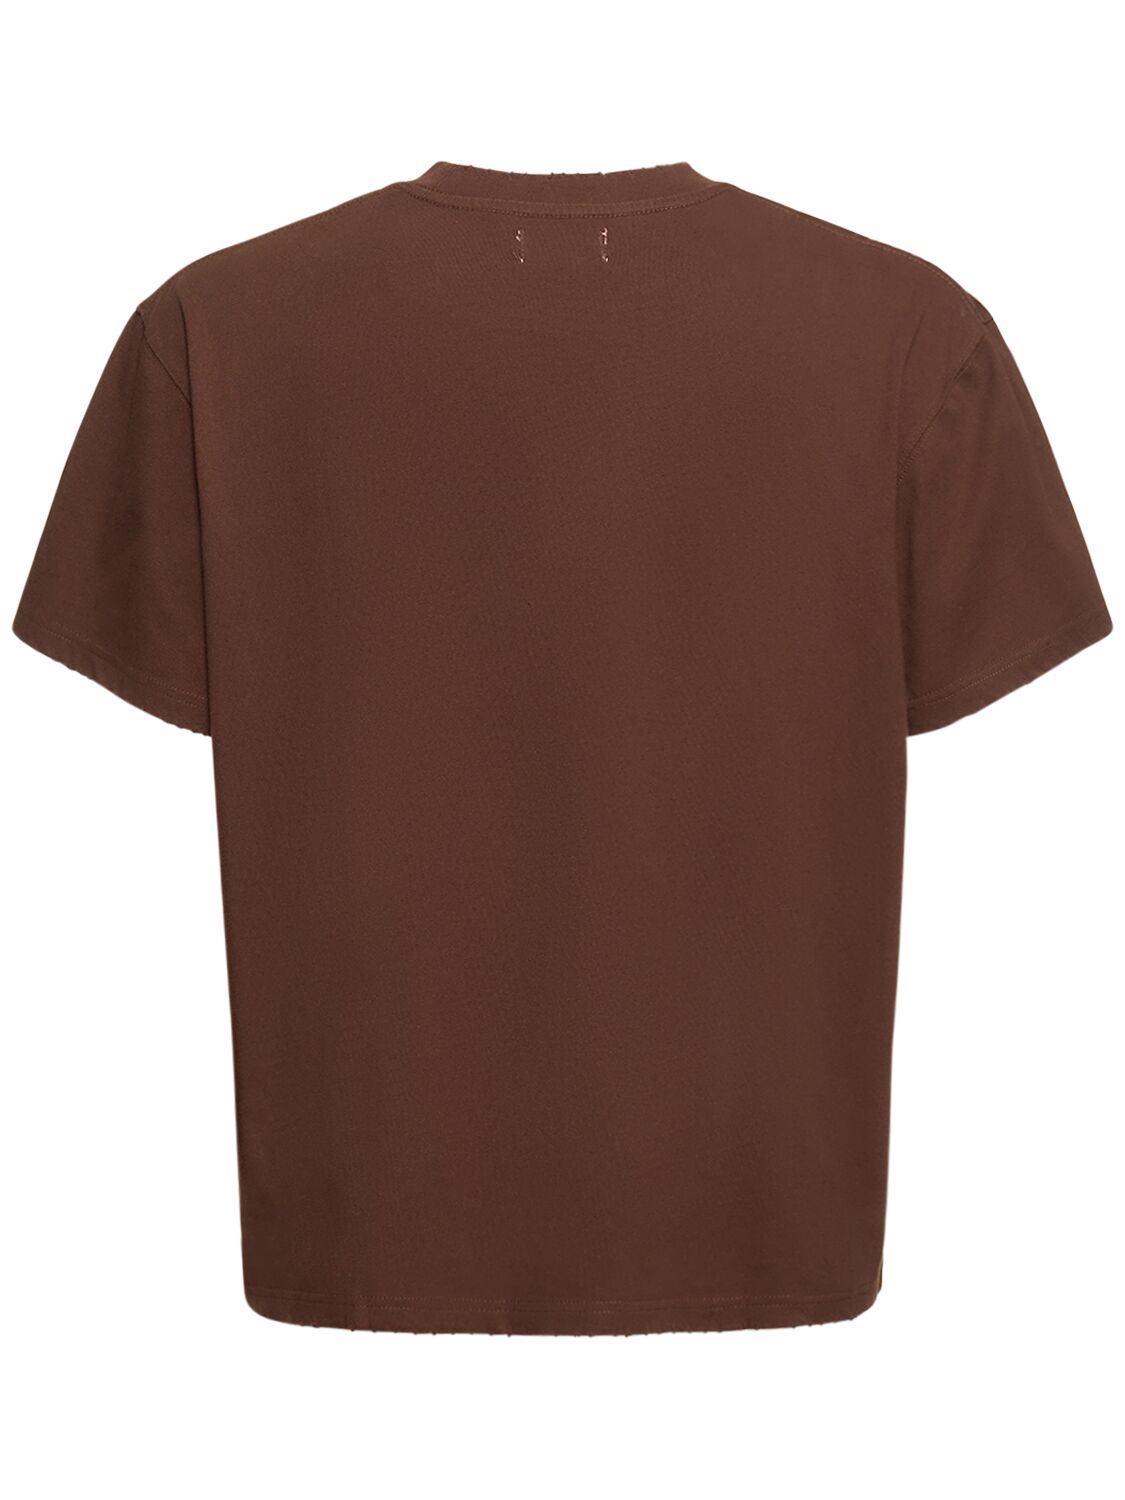 Shop Honor The Gift Mystery Of Pain T-shirt In Brown